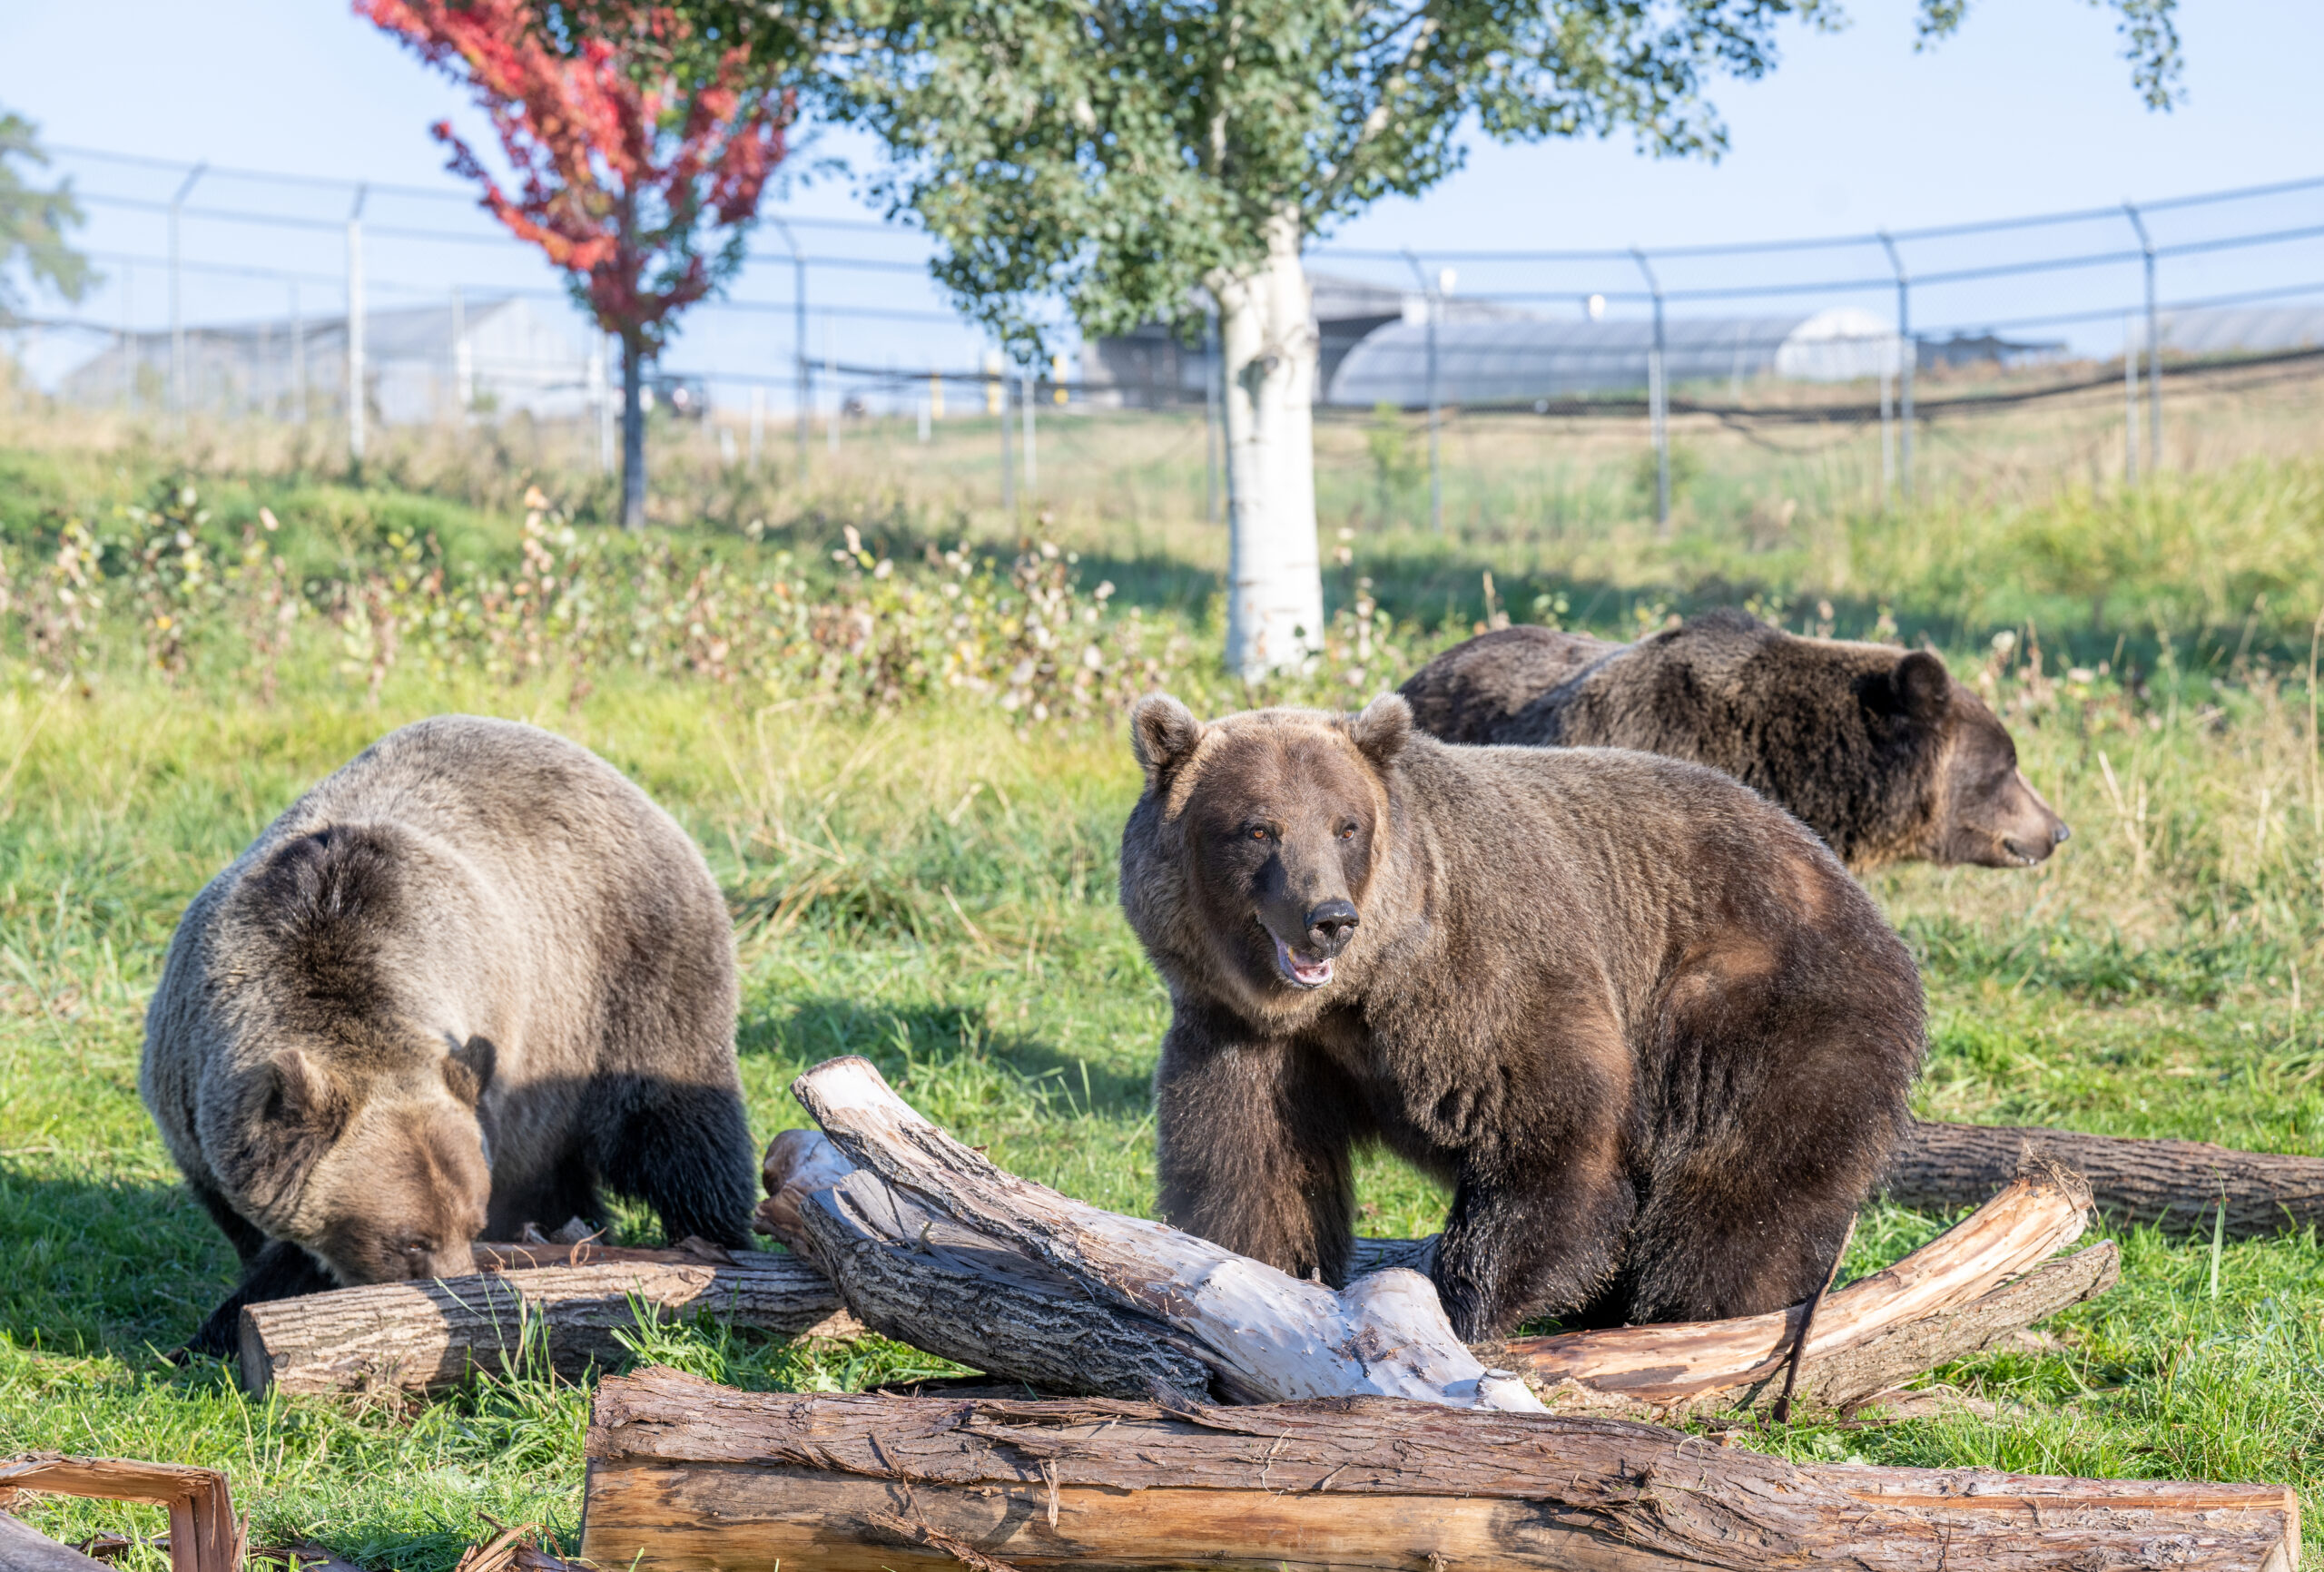 Some Alaska bears spent a lot of time eating berries, so this biologist